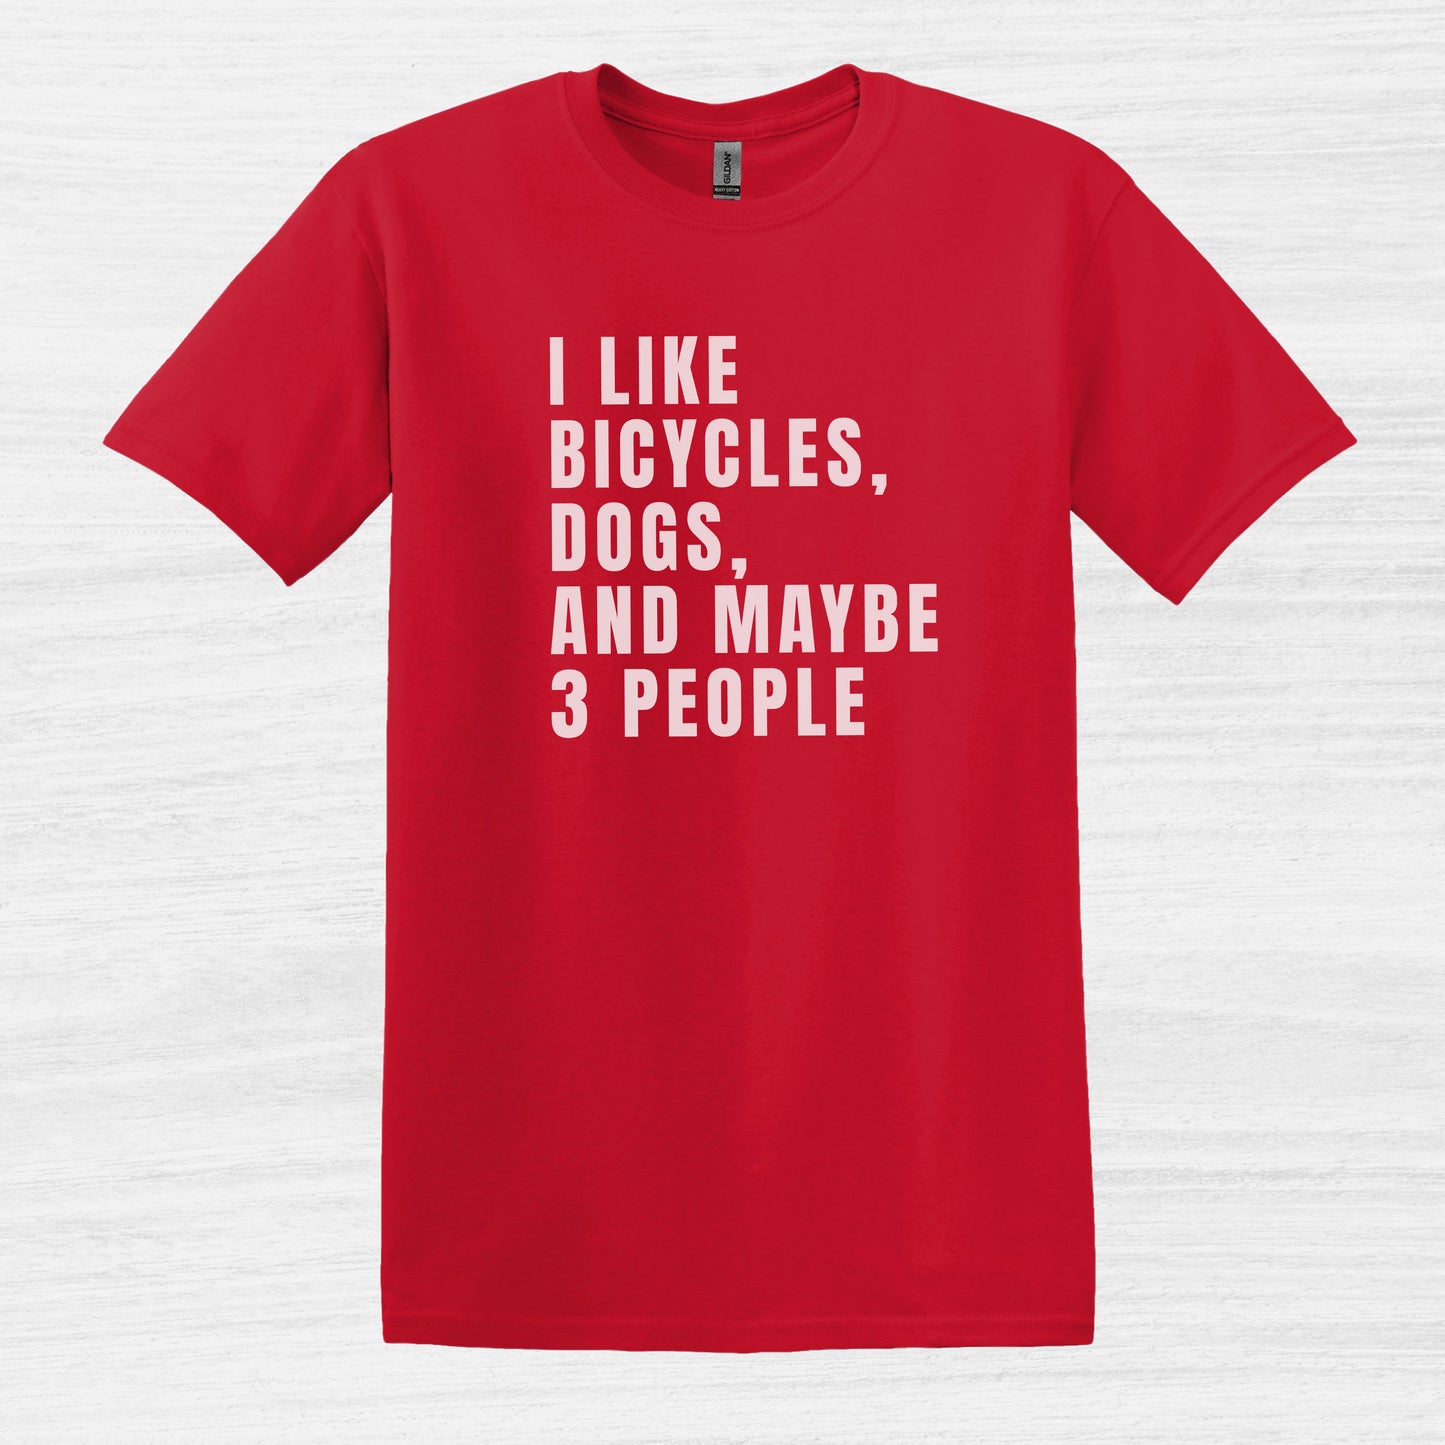 Bike Bliss I Like bicycles dogs and maybe 3 people T-Shirt for men Red 2